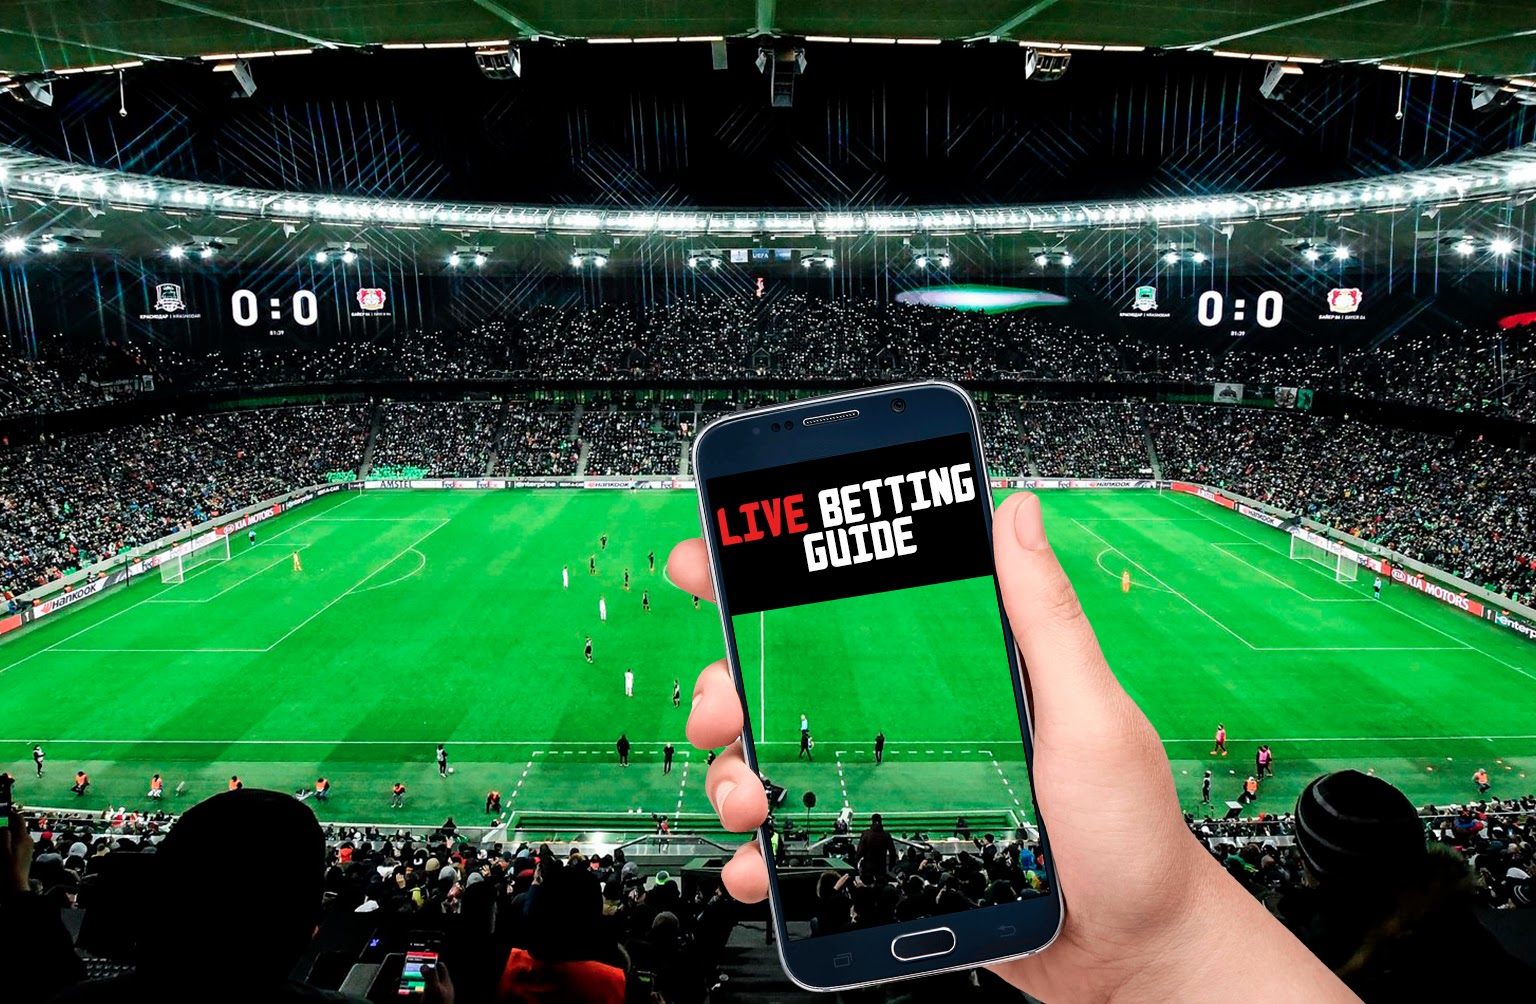 How to Choose a Reputable Live Betting Site